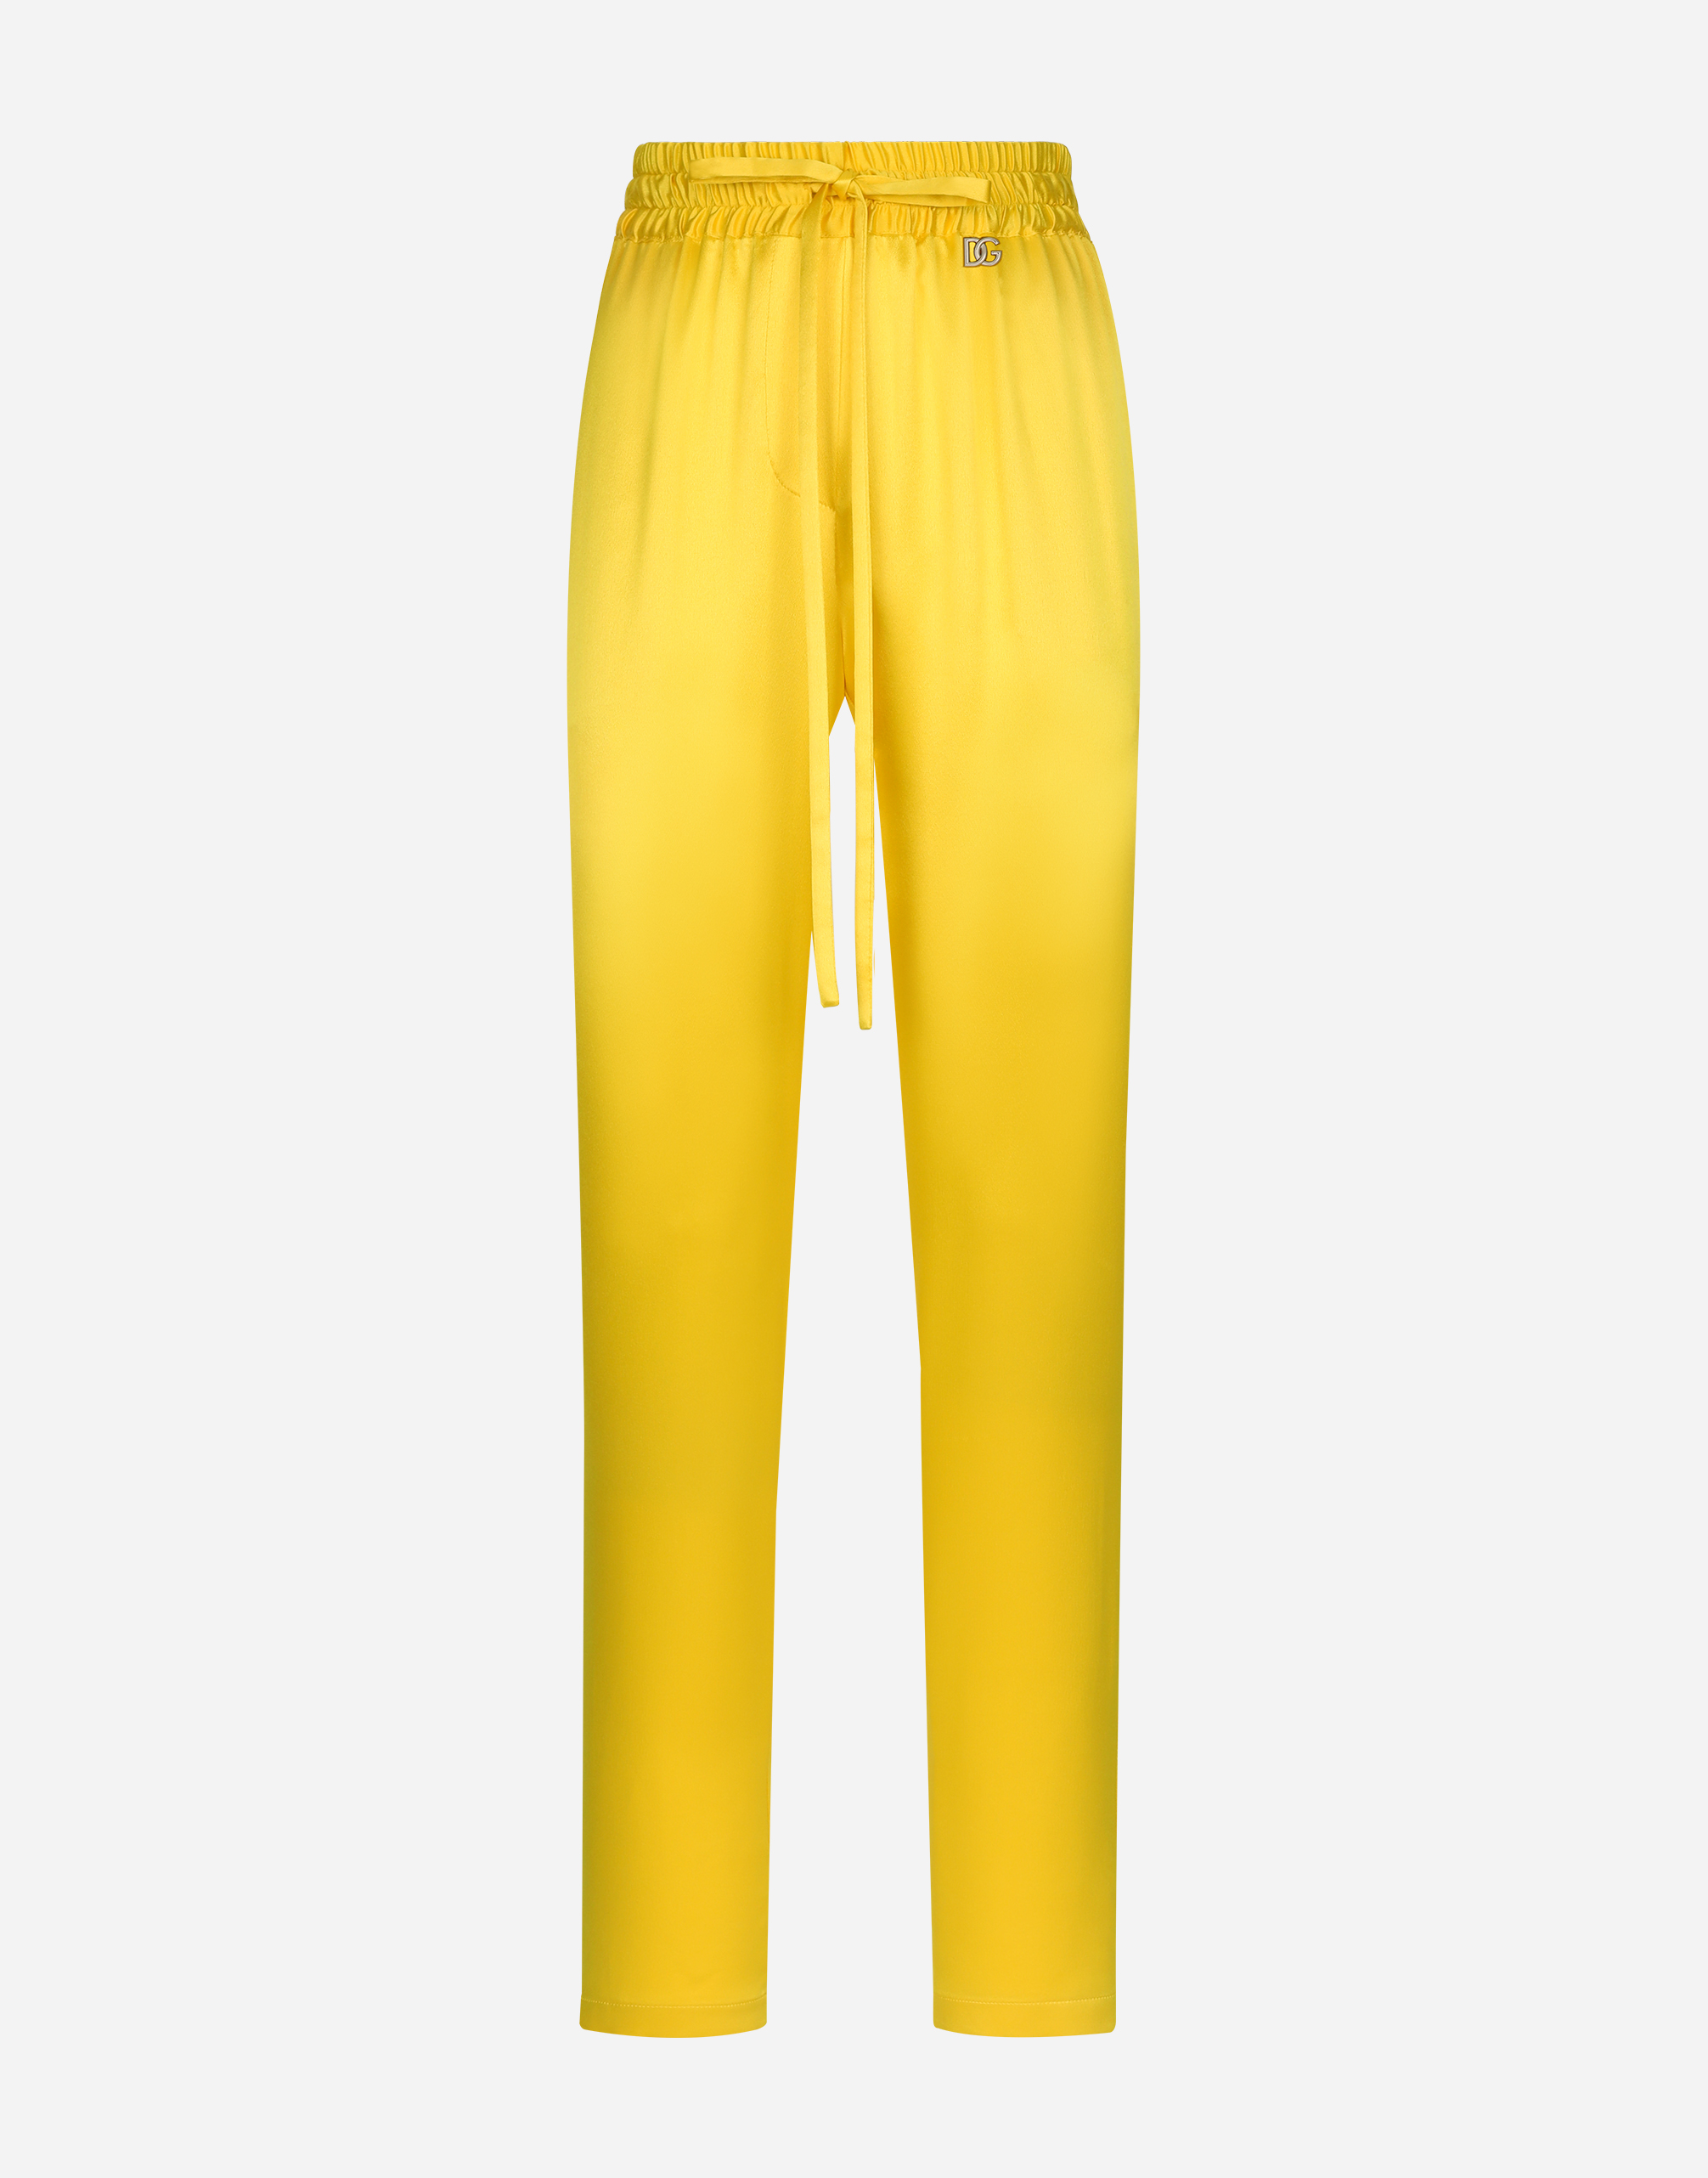 Silk crepe pants with elasticated waistband in Yellow for Women 